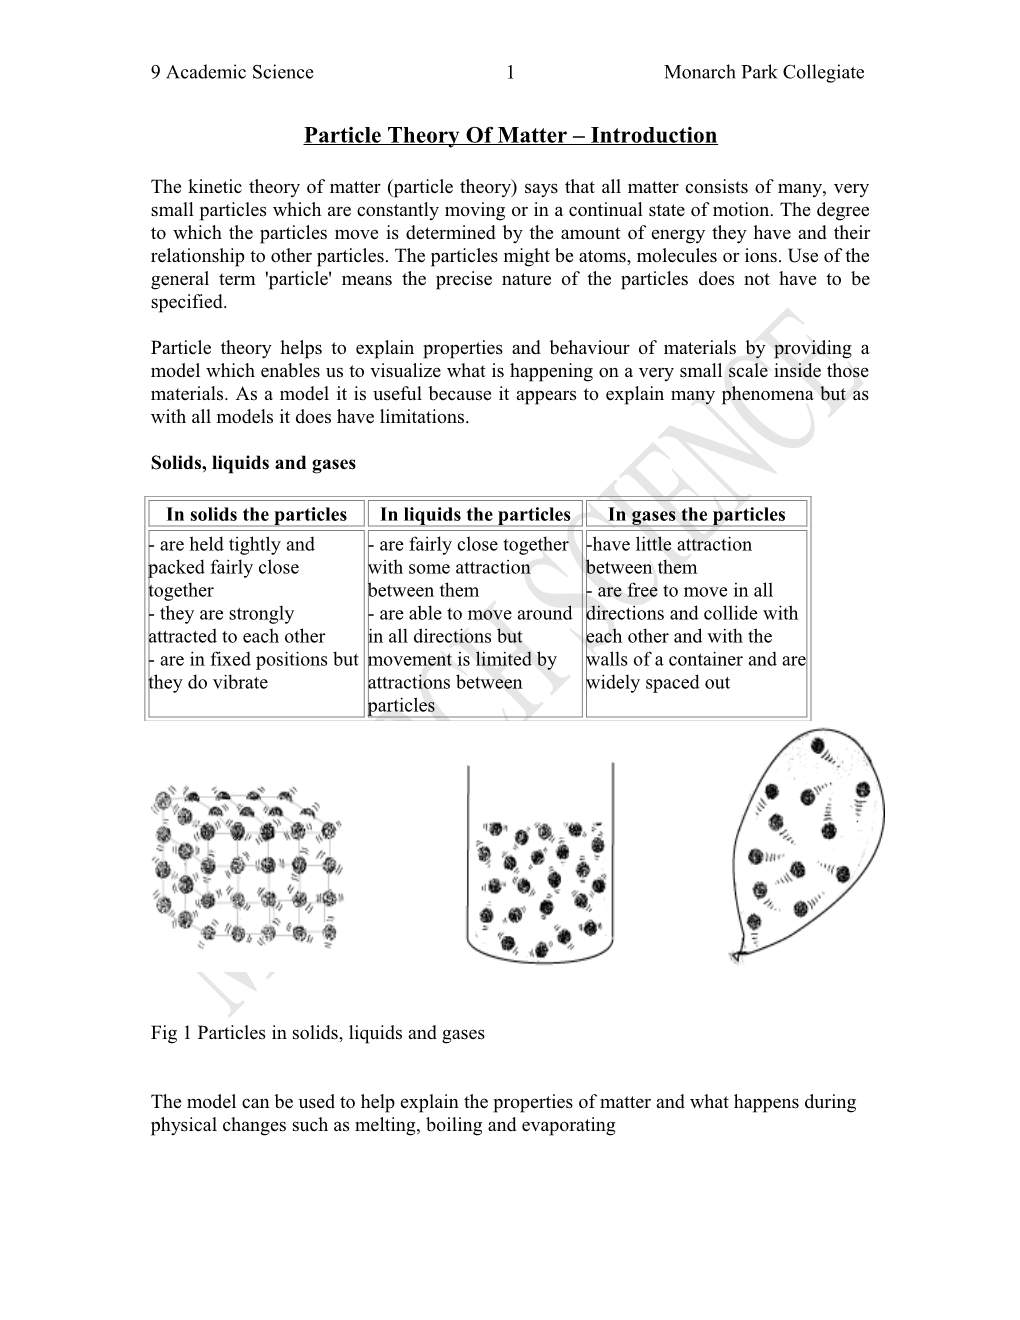 Particle Theory - Introduction